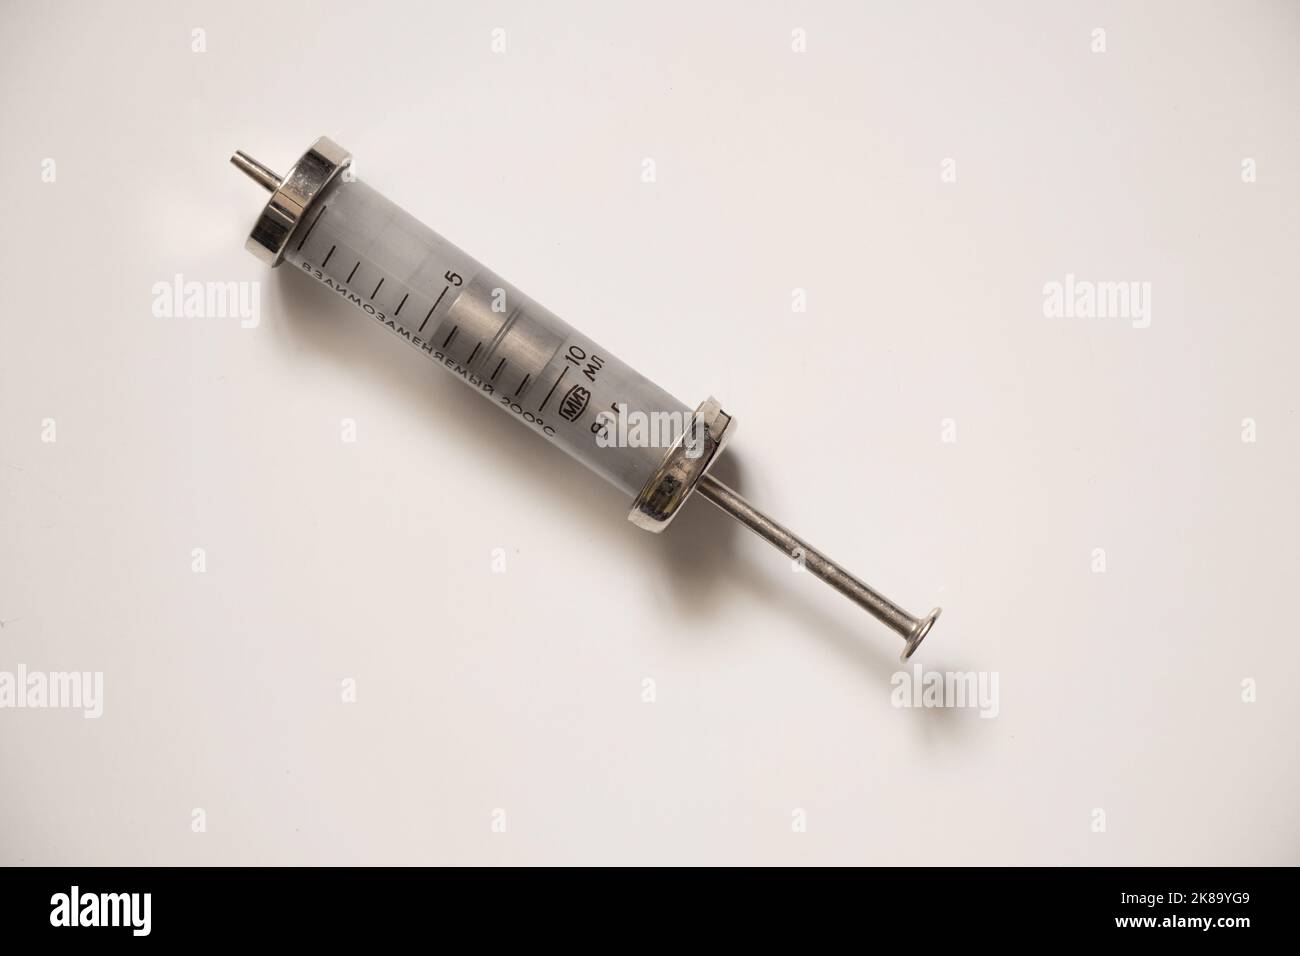 interchangeable old glass syringe on a white background, injections and syringes antiques Stock Photo